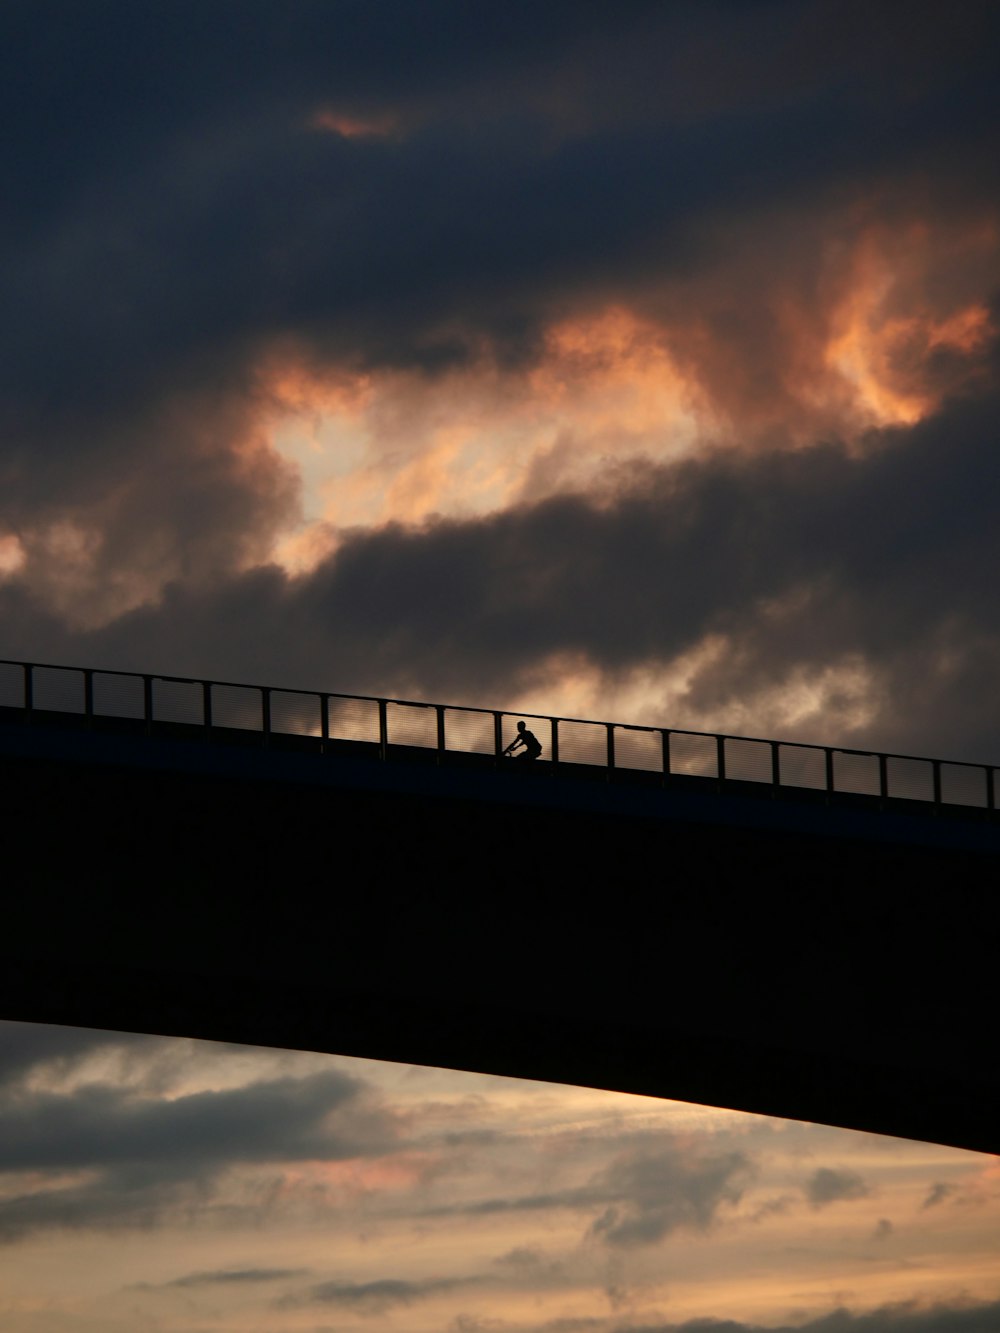 a person walking across a bridge at sunset